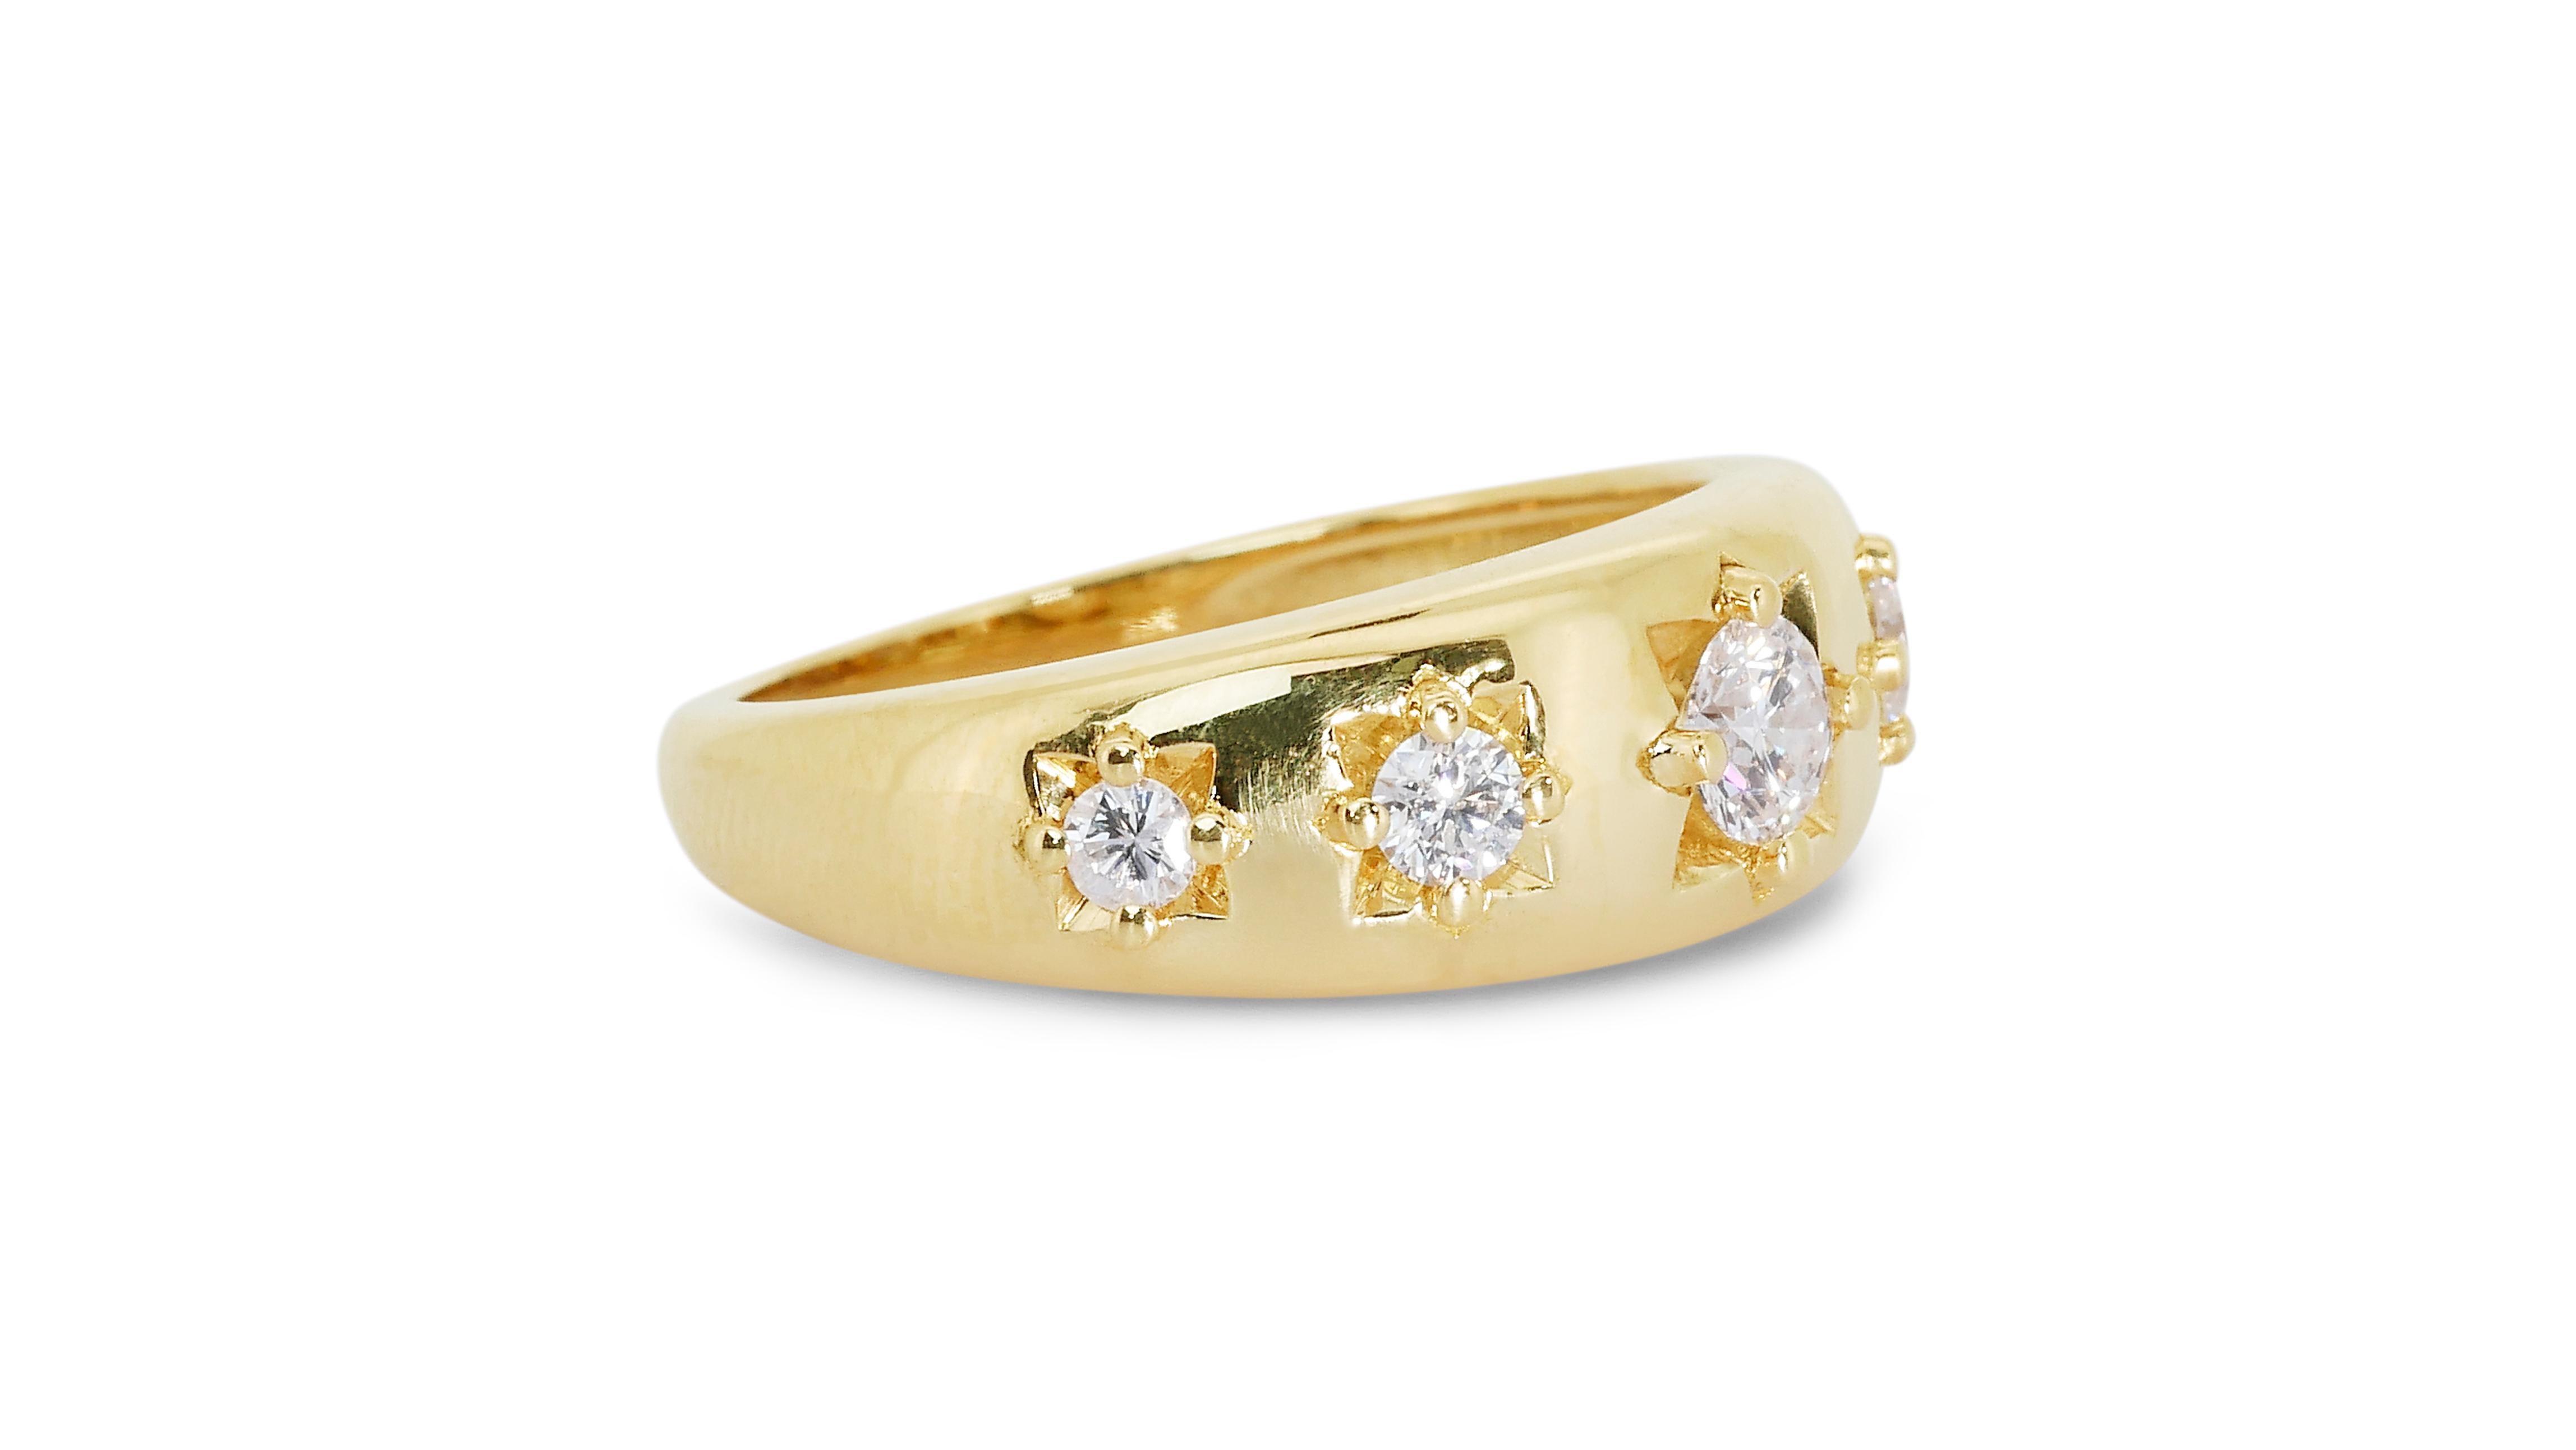 Marvelous 18k Yellow Gold Dome Ring w/ 0.55 Ct Natural Diamonds Aig Certificate For Sale 1